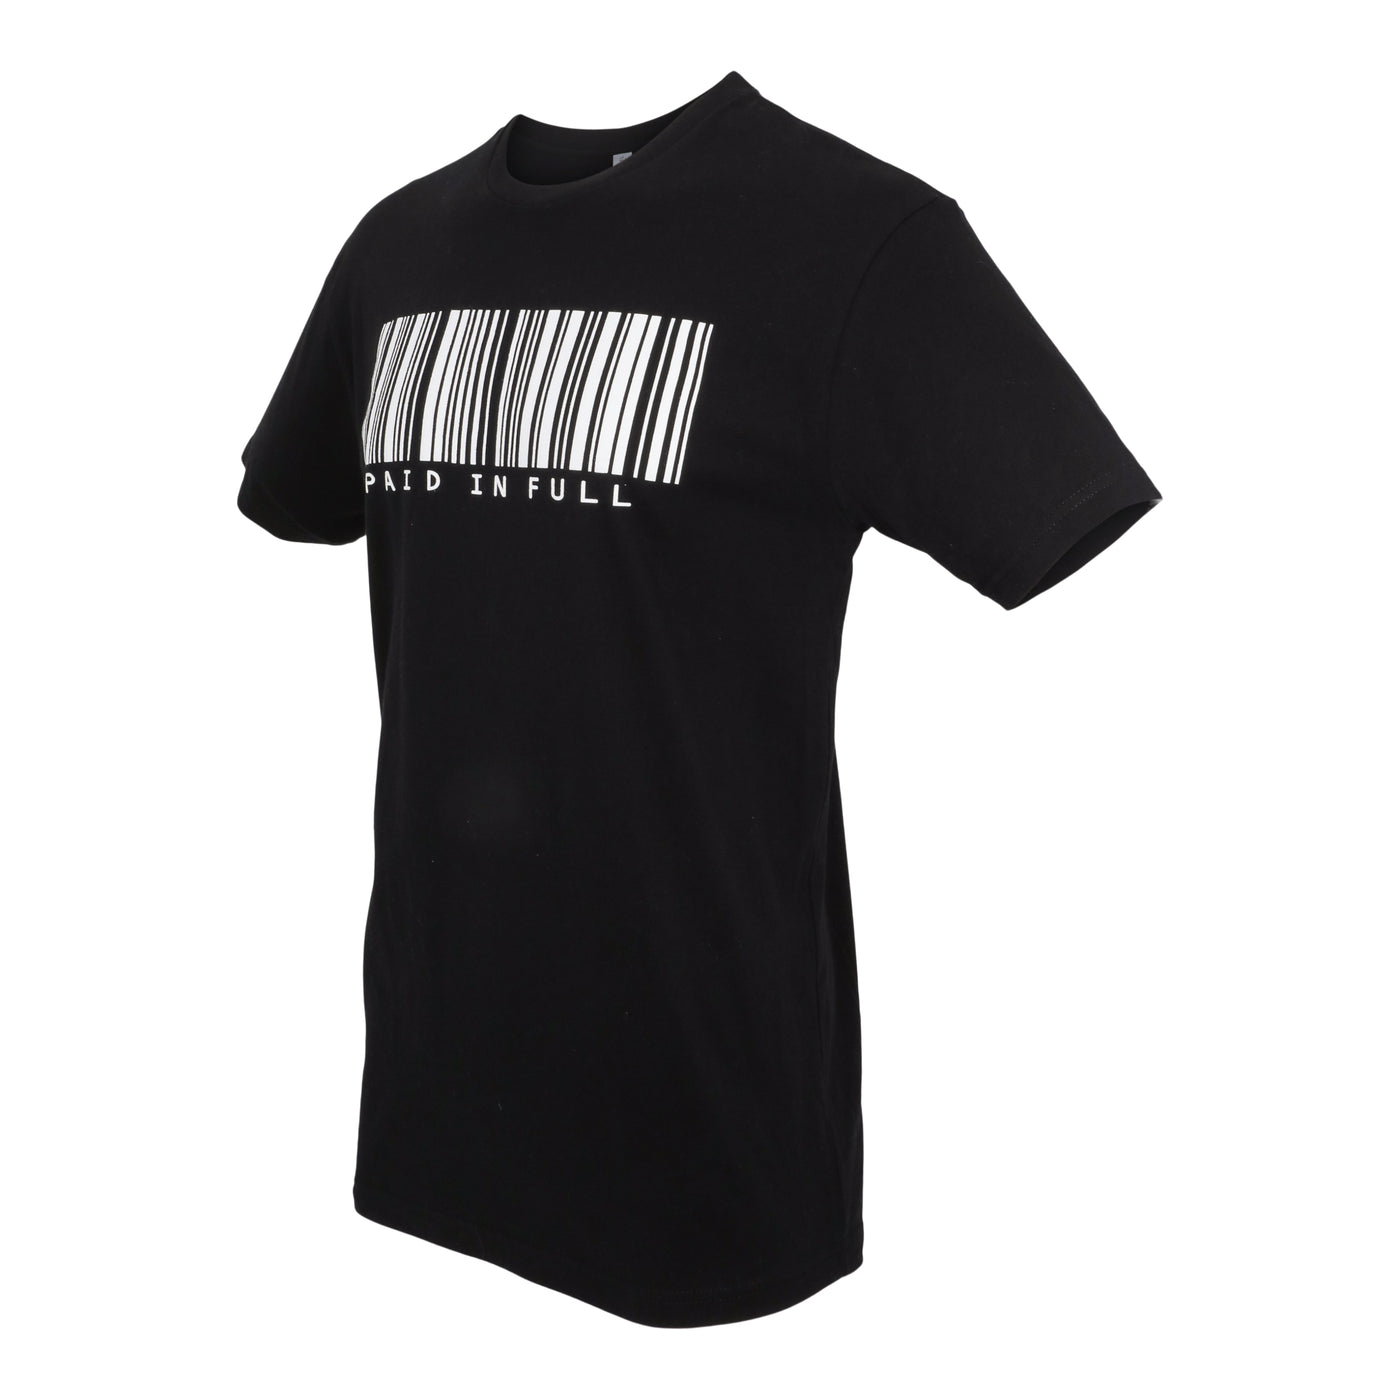 Created Paid In Full Relaxed black short sleeve t-shirt diagonal view